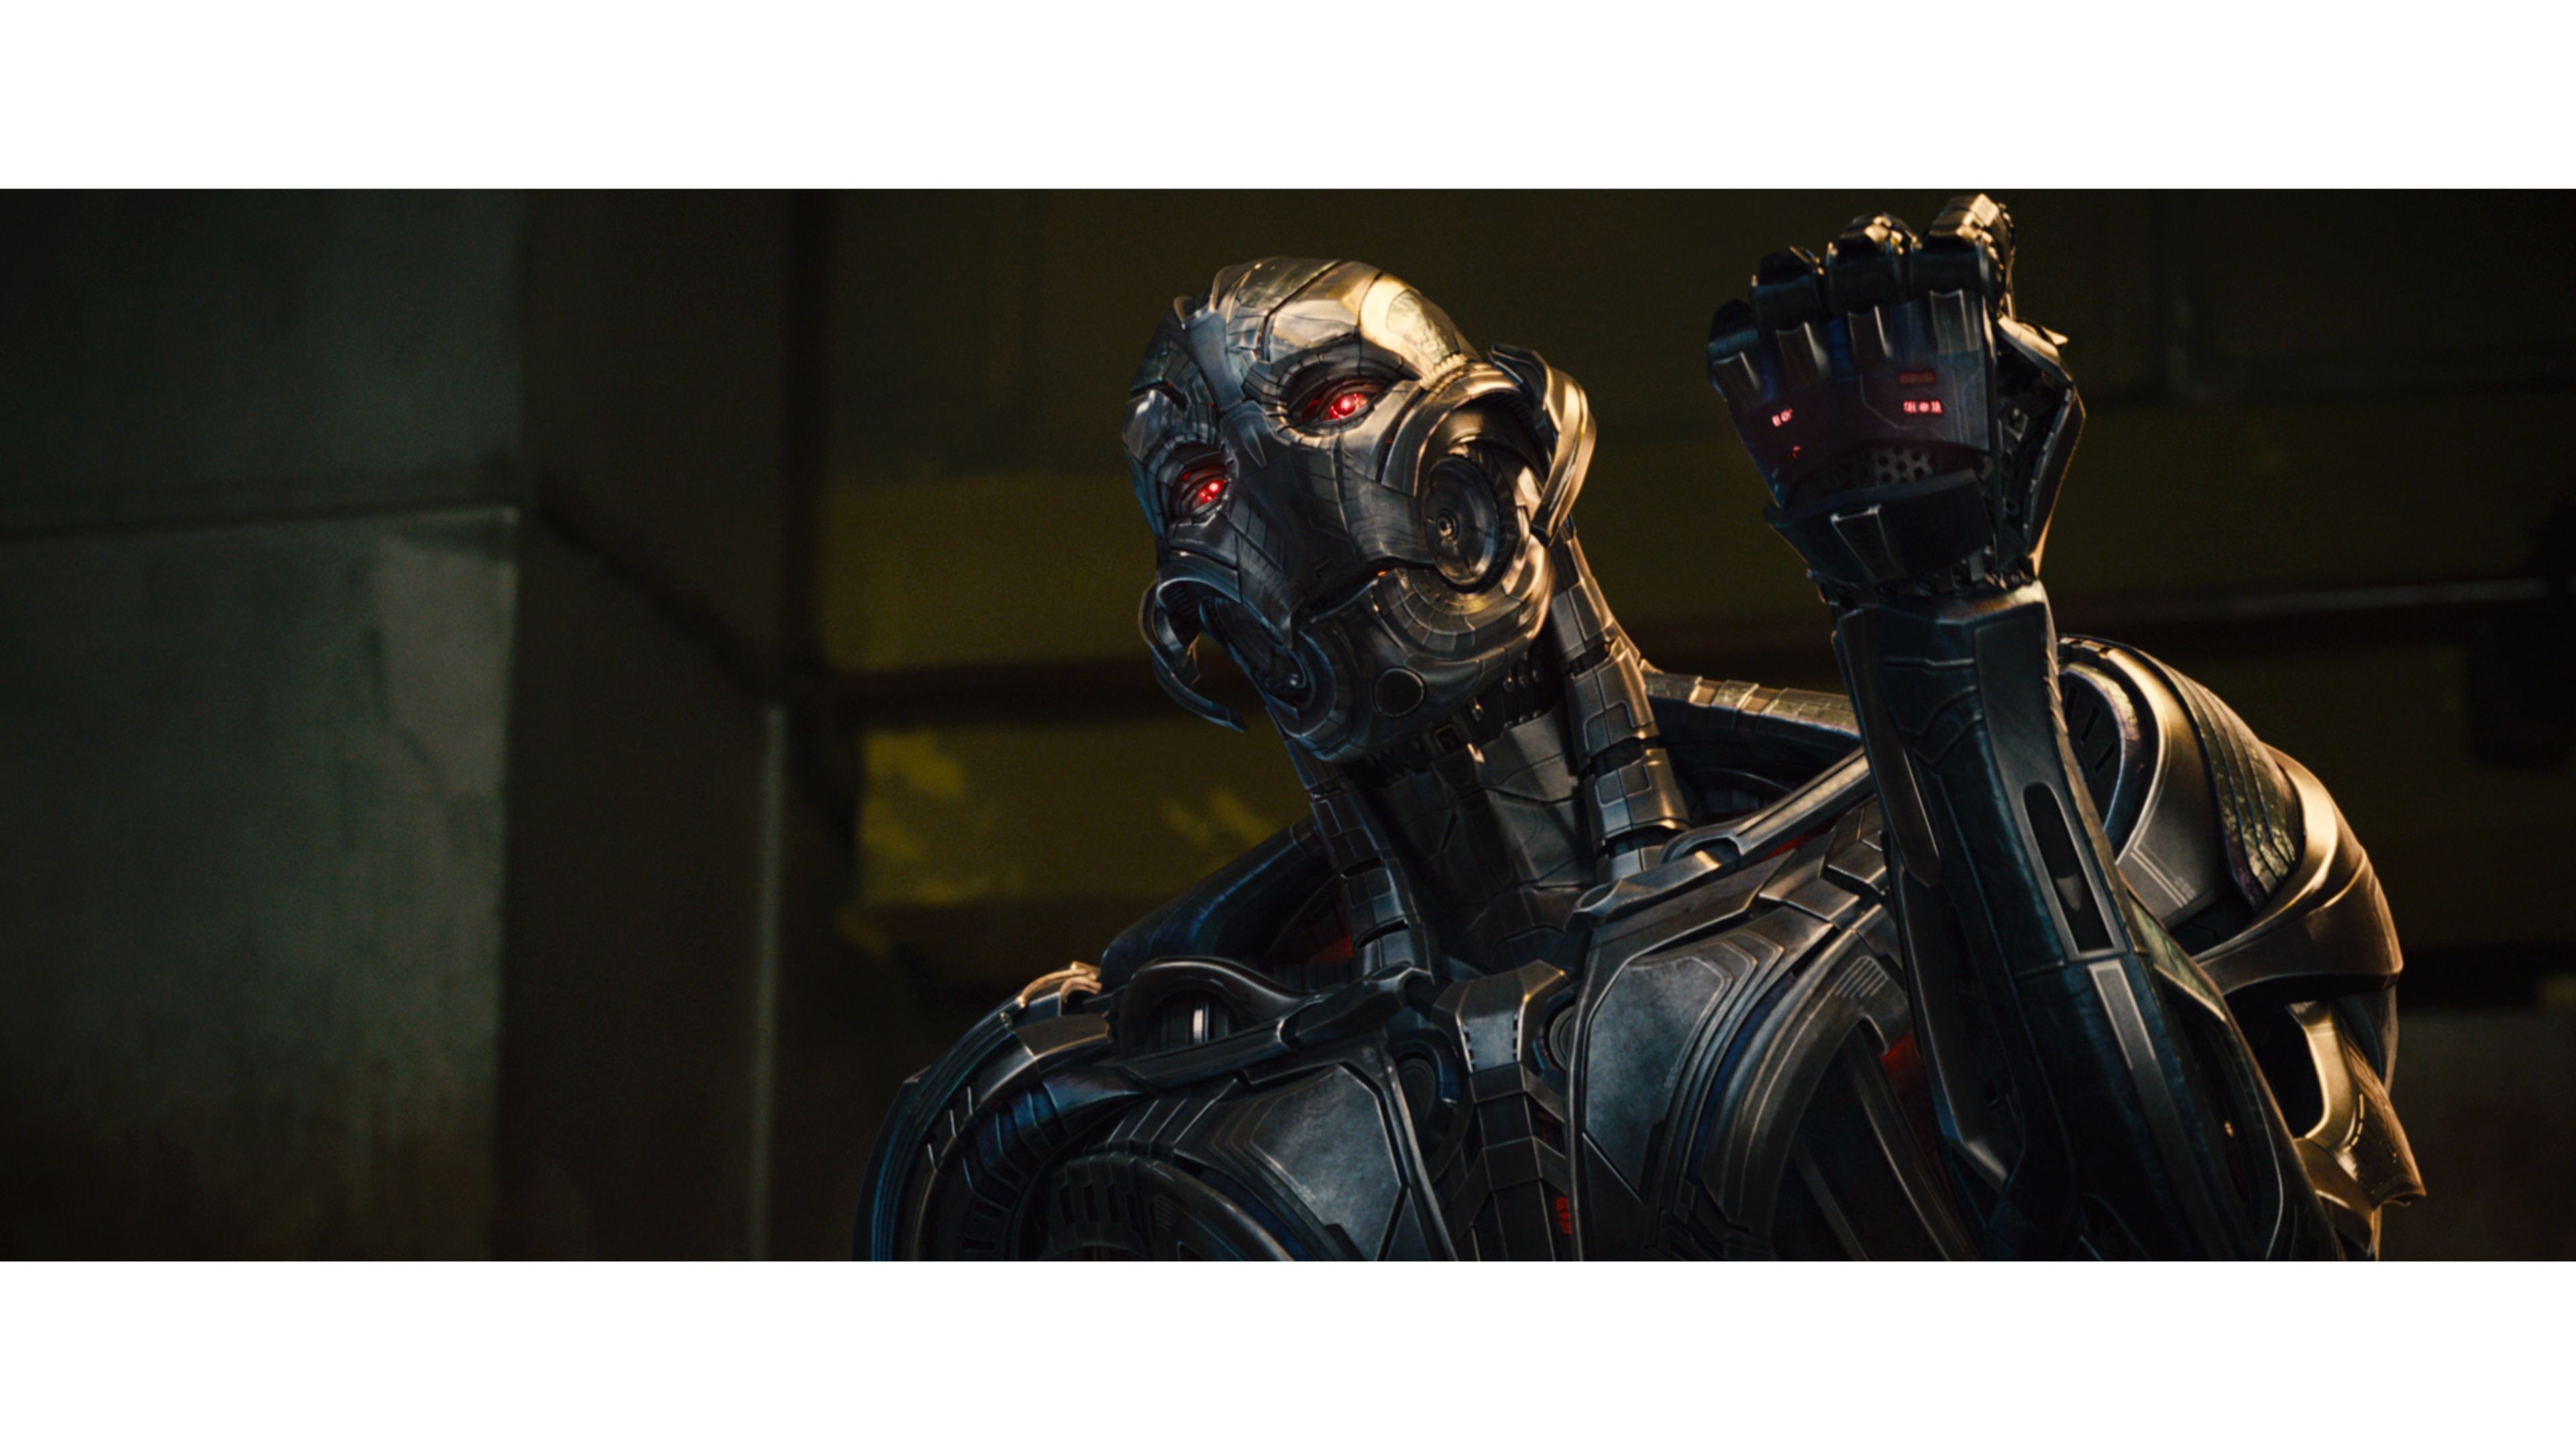 Ultron 4K wallpaper for your desktop or mobile screen free and easy to download